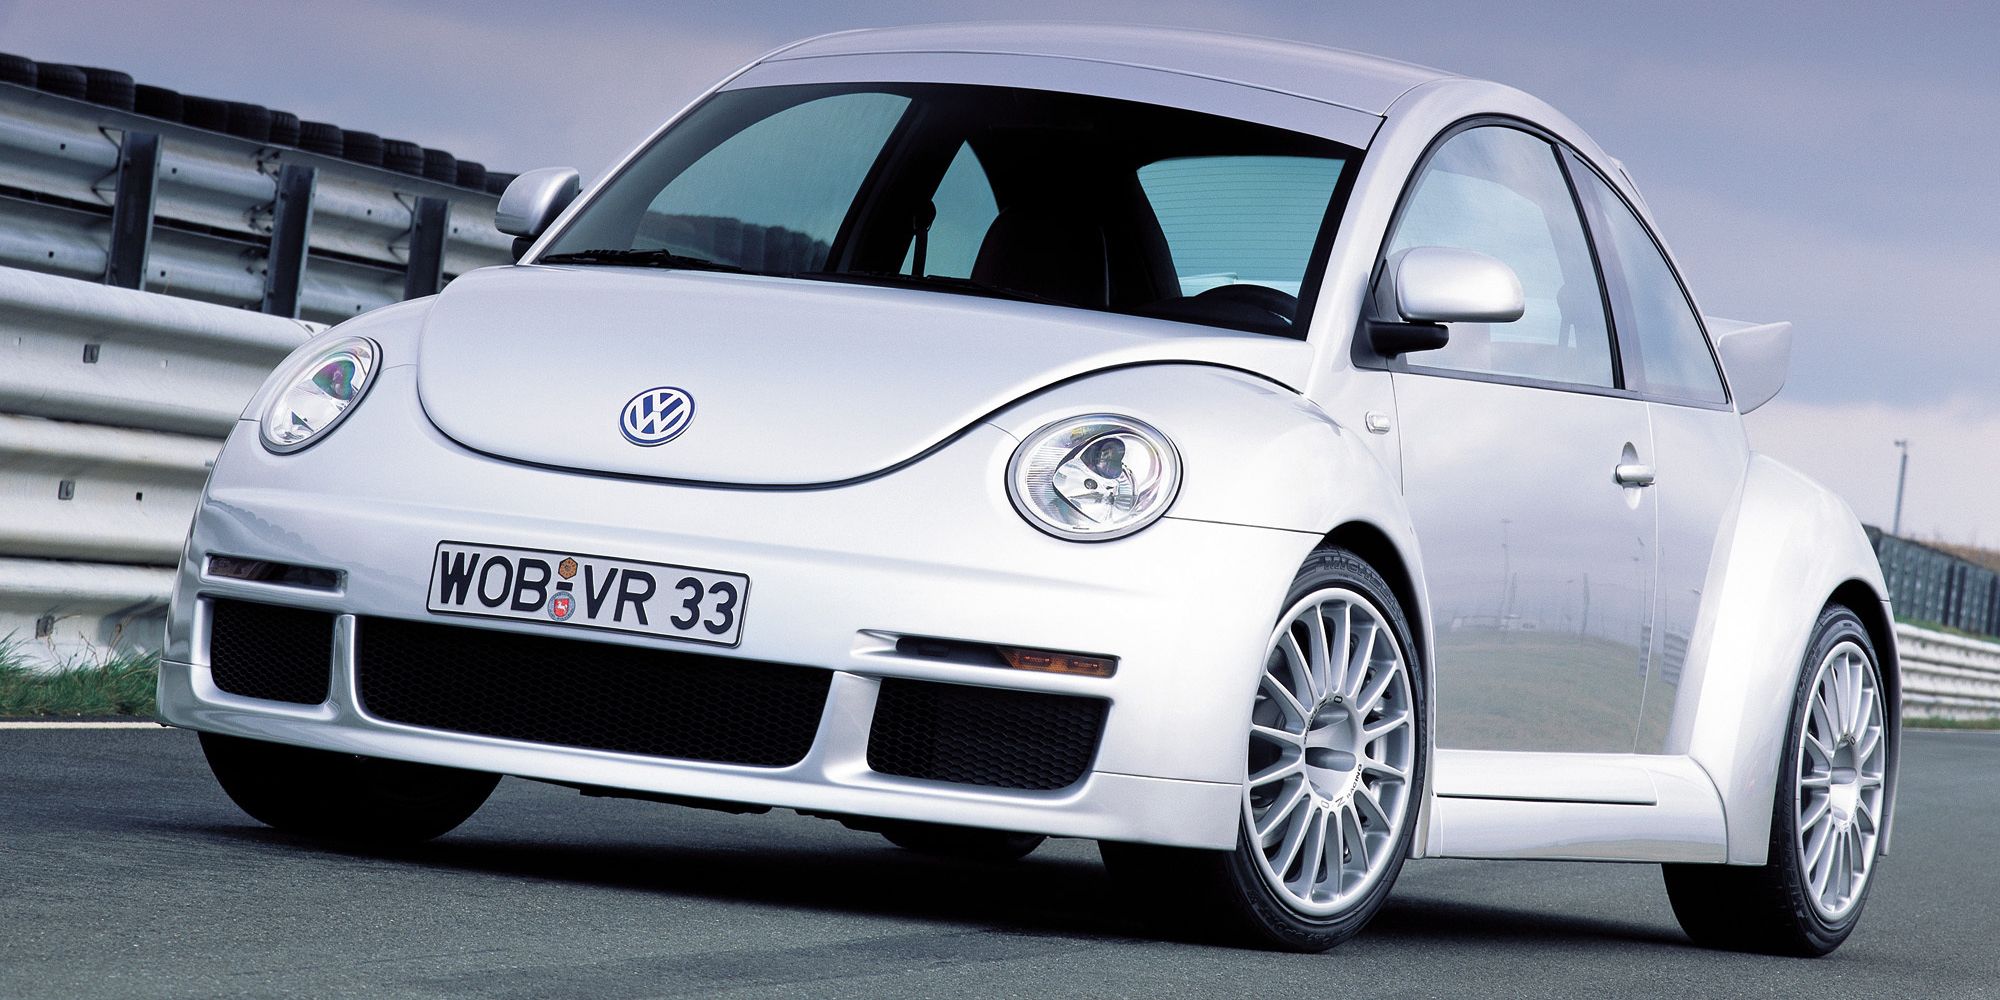 The front of the Beetle RSI